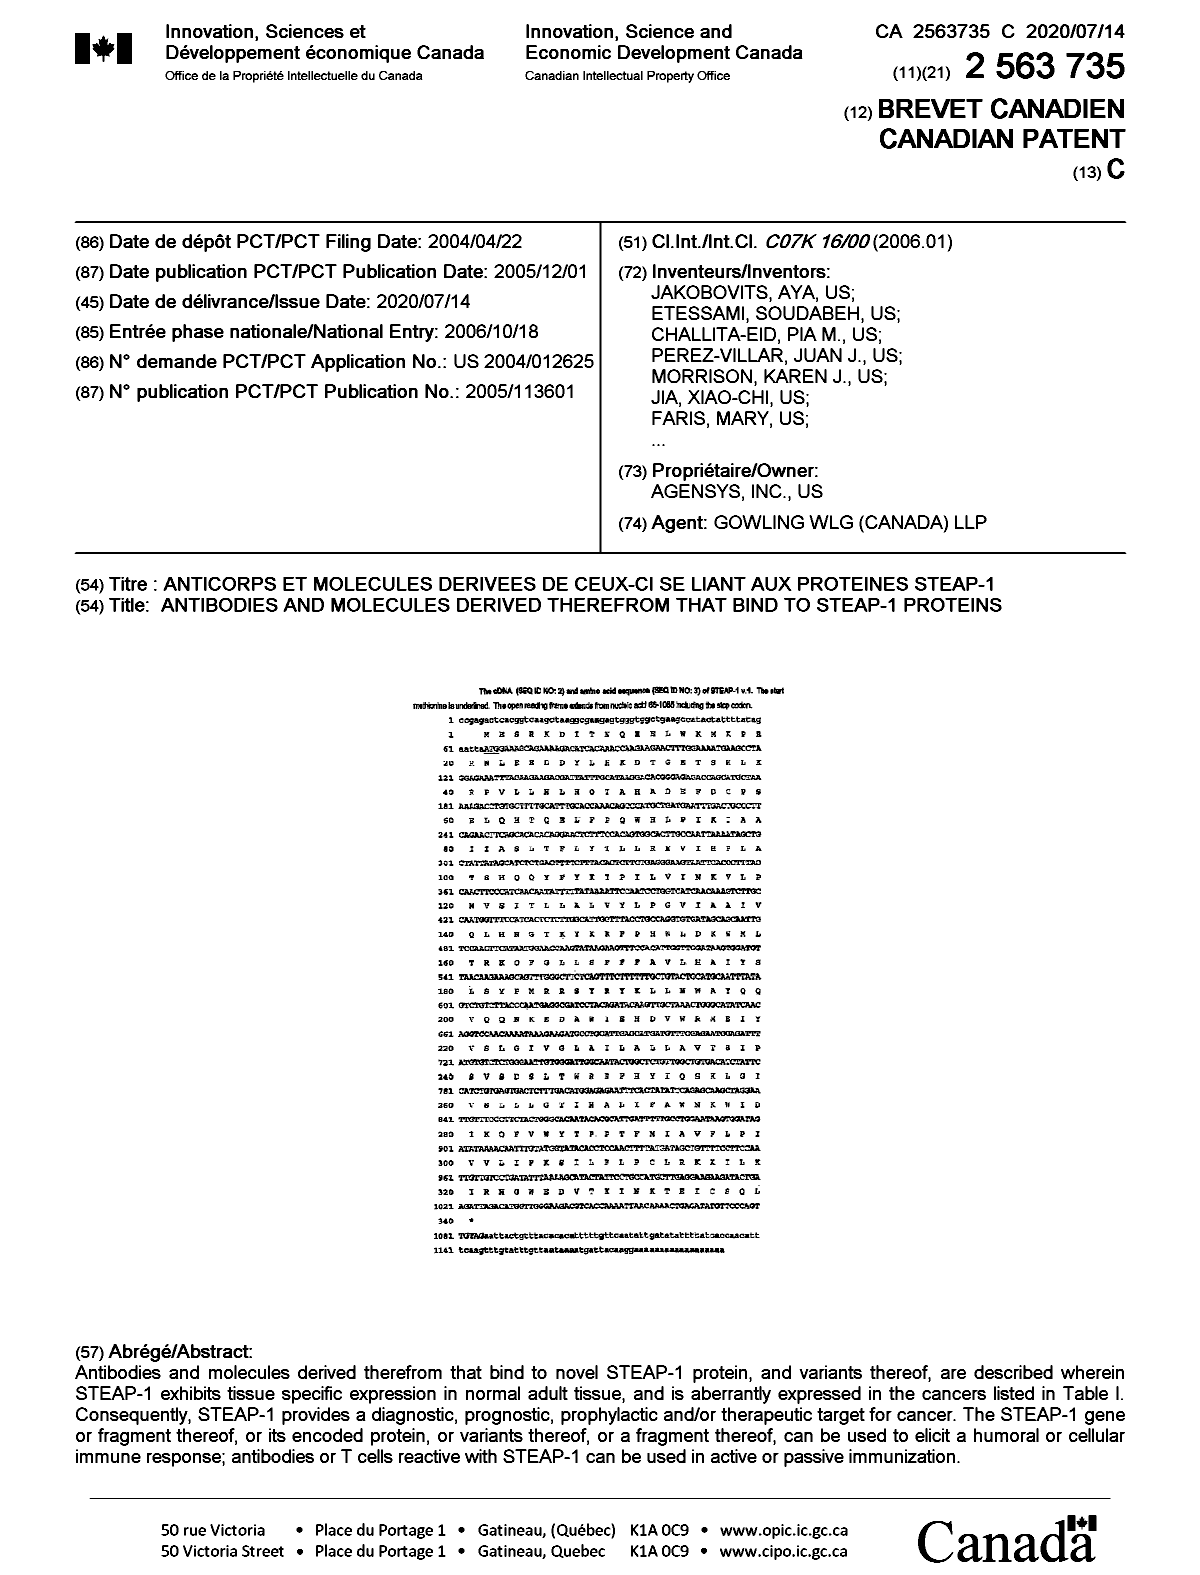 Canadian Patent Document 2563735. Cover Page 20200615. Image 1 of 2